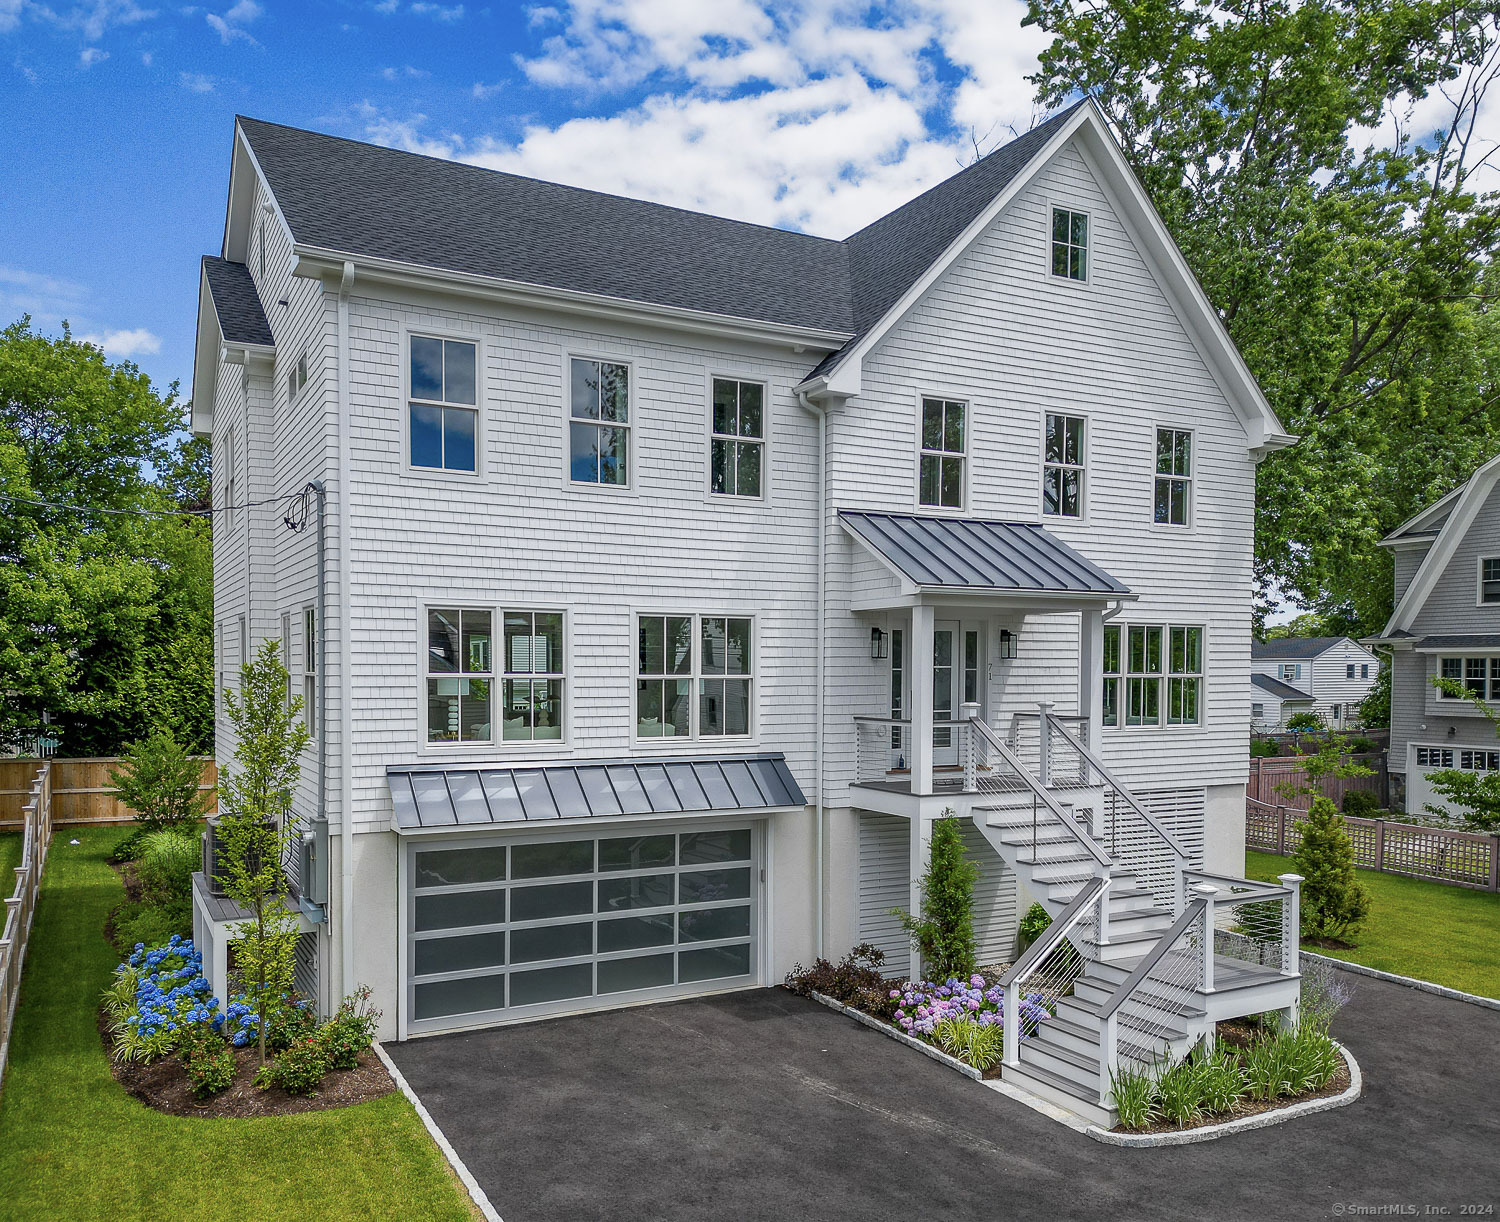 Stunning Coastal New Construction home. Live the beach lifestyle! This home sits on a sleepy little street just steps to beach & park and a short walk to marina, schools, downtown, train, farmers market, live music & more. 4000 sq.ft+, w/5 bdrms (4 bdrms on 2nd level) & 4.5 bthrms. Professionally designed w/exceptional finishes, 9' ceilings, beefy moldings, open floor plan, light-filled & extremely generous room sizes. Three finished levels include a sleek chefs kit w/10' island, quartz counters, top of the line Thermador appl's w/custom cabinet panels, touch open Frig w/SS interior, 6 burner gas cook w/griddle, butlers w/large walk-in pantry, great rm w/flr to ceiling tiled gas fpl, dreamy master w/gas fpl & 2 walk-in closets, stunning luxury bth w/heated flr features 10' vanity w/quartz, lrg laundry rm, 3rd flr offers full ceiling height w/ media/playrm w/ wetbar, designated office space w/private balcony, 5th bdrm & full bthrm (great for guest or home office suite).LL loggia, fab for in/outdoor liv, w/sliding barn door leads to your entertaining patio & cedar fenced yard (room for a POOL) w/irrigation & prof. landscape. Huge ground level mudrm, 2 car garage (upgrade option for 3rd bay), tons of storage & circular driveway. FEMA compliant! Gorgeous 4" white oak flr, Kohler & Rohl plumbing, Chloe Winston & Arteriors lighting, prof. outfitted closets, wired for audio & generator, designer tile, high efficiency multi-zone heating & cooling, tankless water, spray foam & more